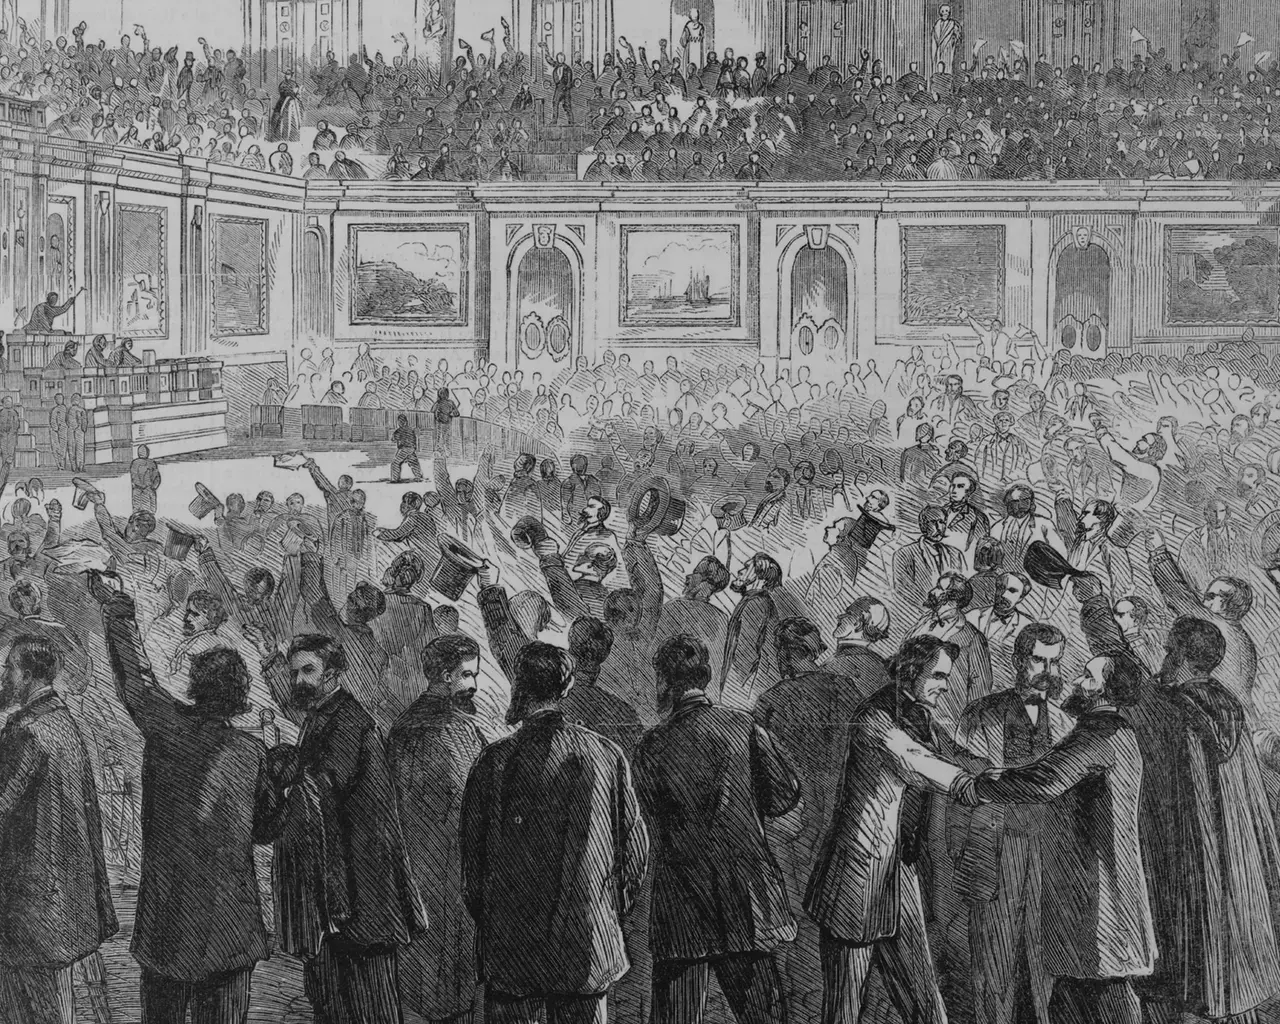 "Reconstruction and the Fourteenth Amendment Project,"&nbsp;scene in the House on the passage of the proposition to amend the Constitution, January 31, 1865. Photo courtesy of the National Constitution Center.